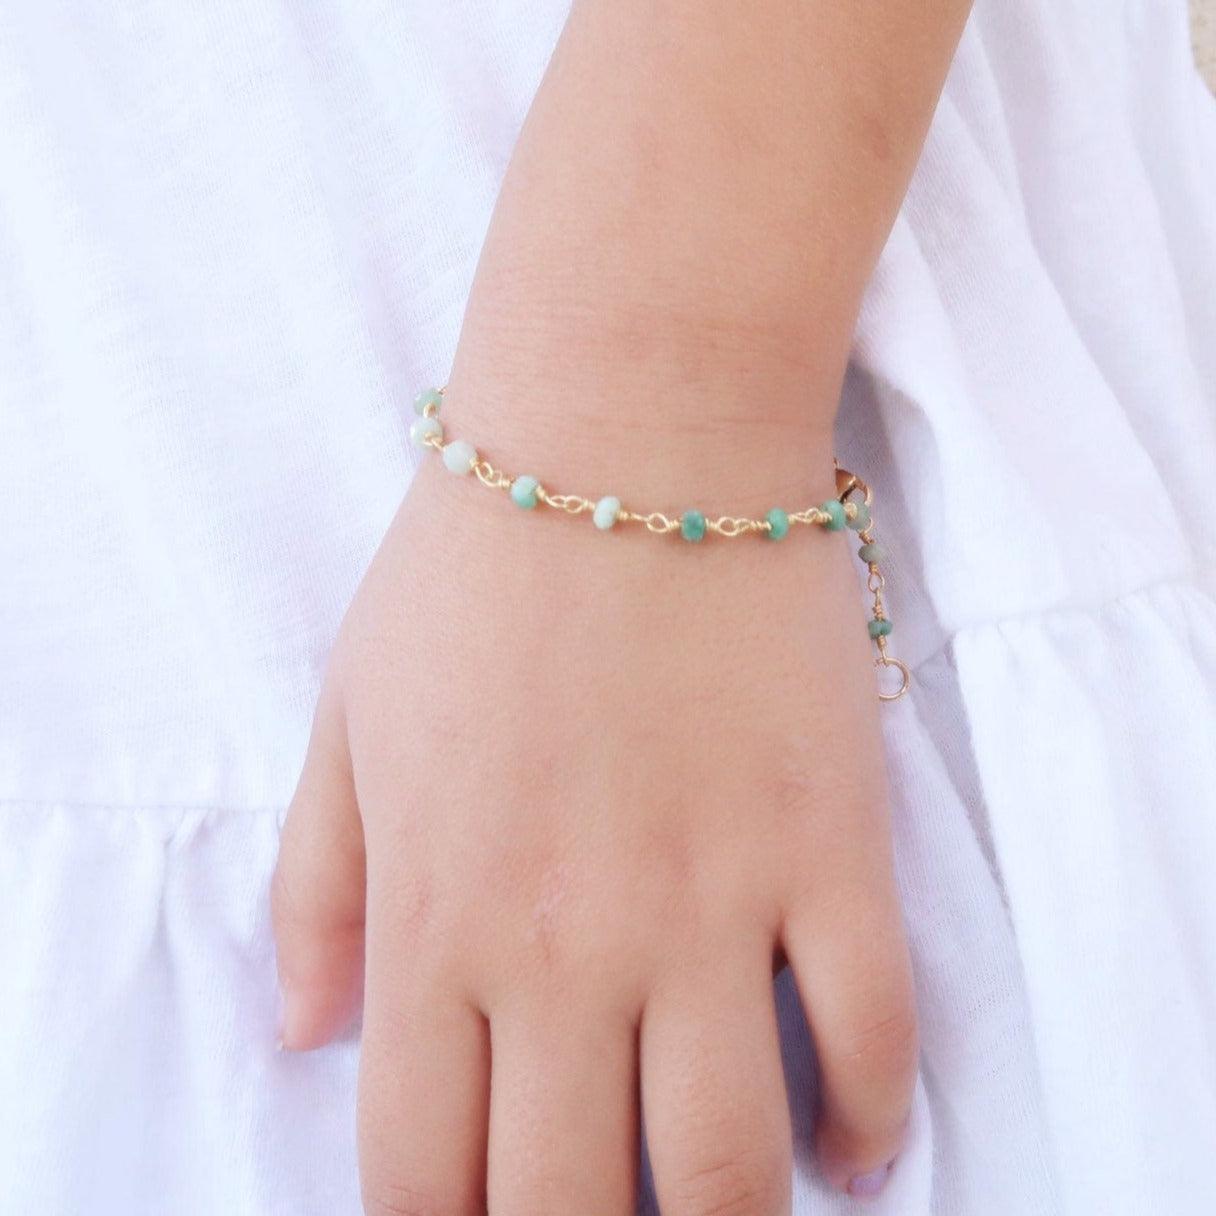 Amazonite power healing gemstone bracelet for kids to empower and encourage them to be more active.